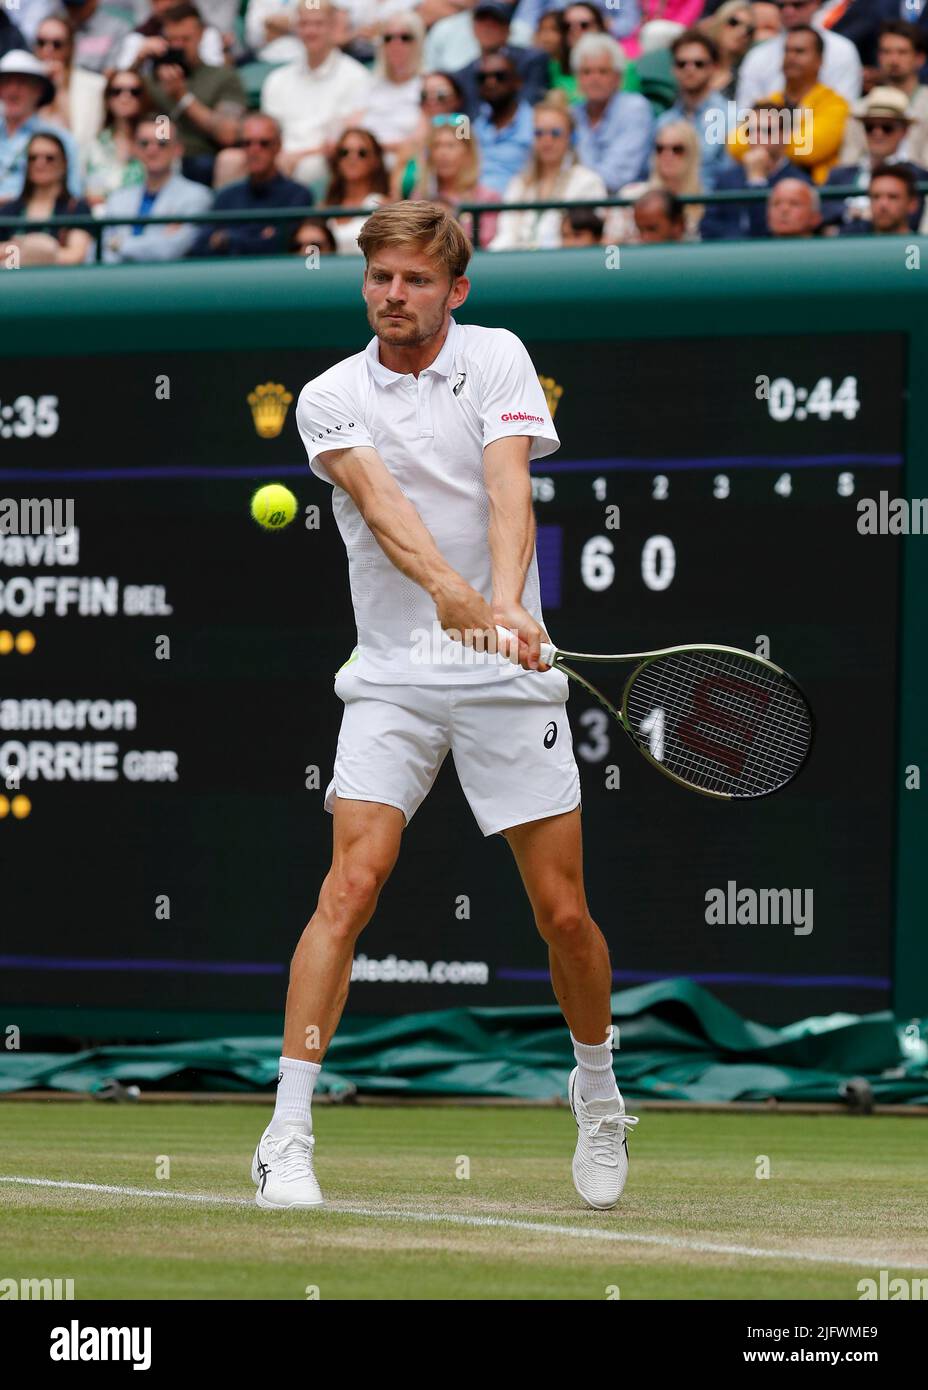 5th July 2022, All England Lawn Tennis and Croquet Club, London, England; Wimbledon Tennis tournament; David Goffin (BEL) plays a backhand to Cameron Norrie (GBR) Credit Action Plus Sports Images/Alamy Live News